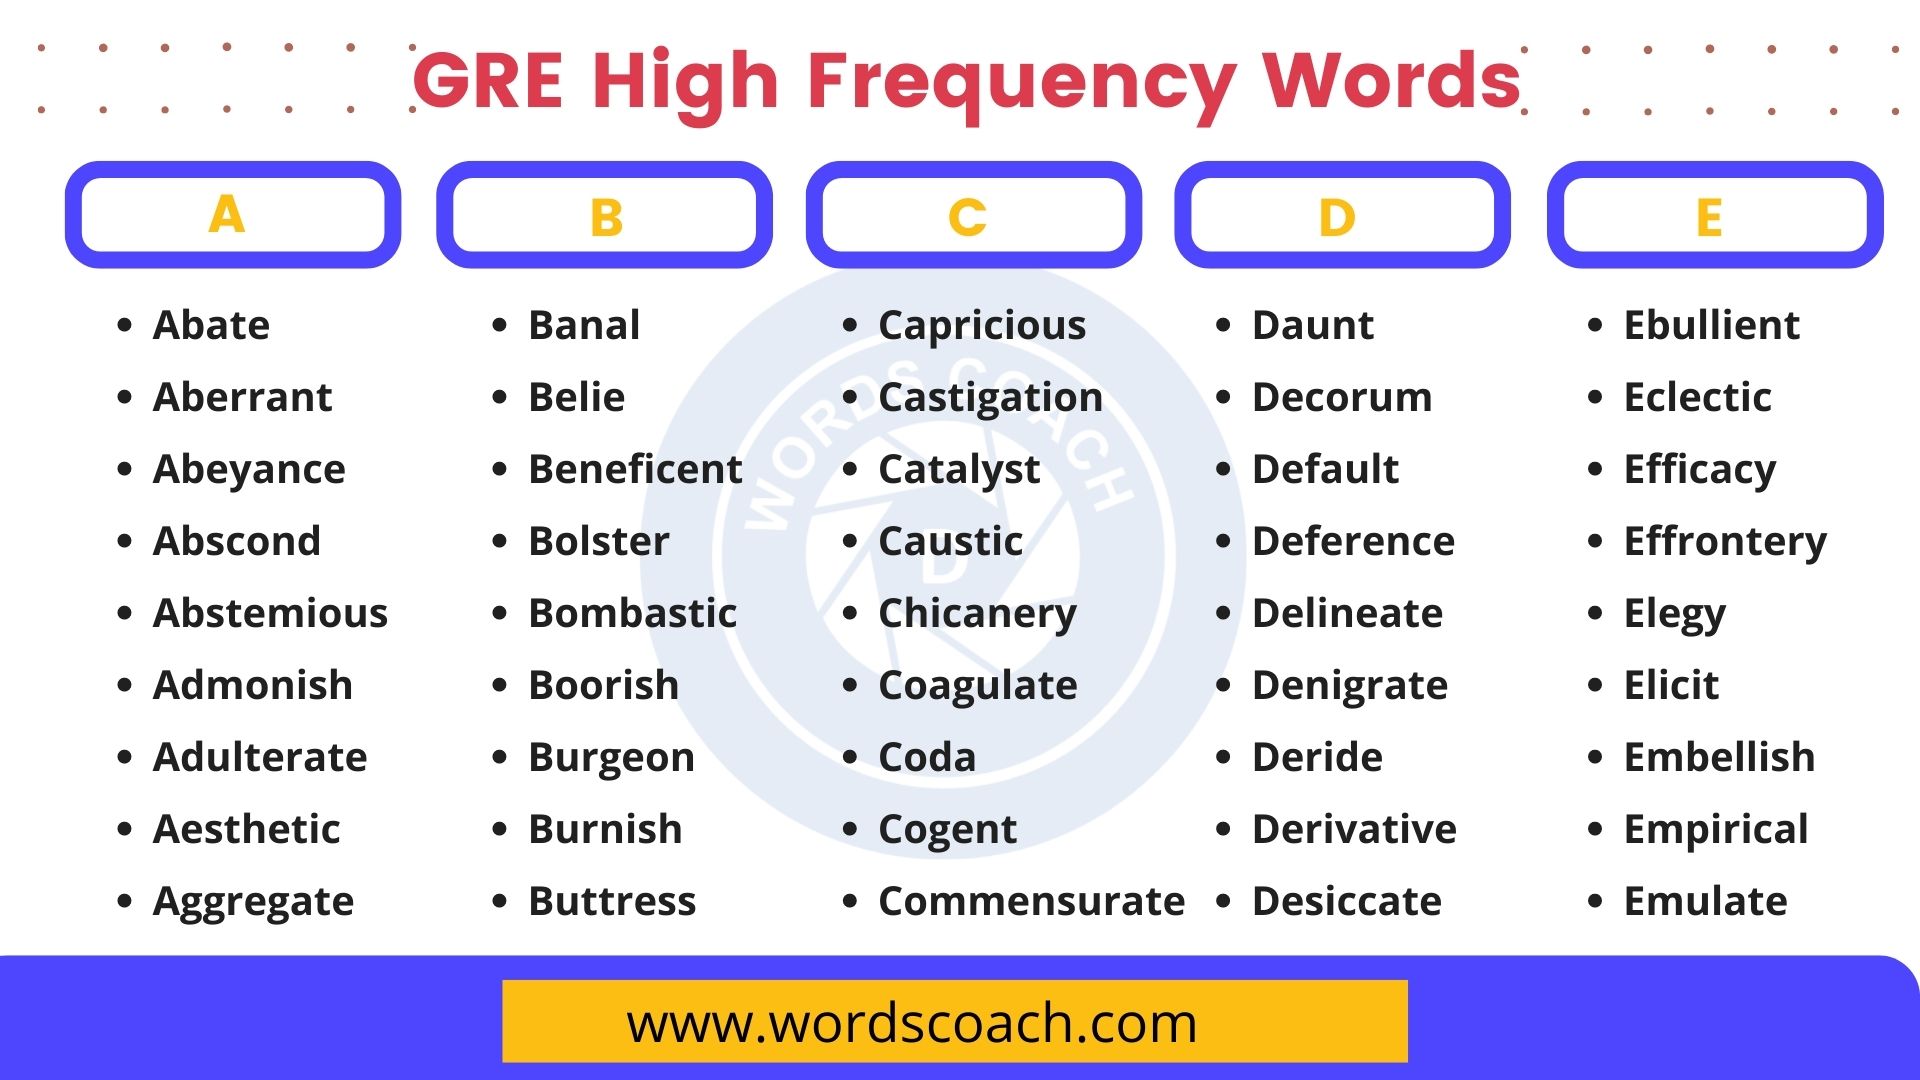 GRE High Frequency Words Vocabulary List